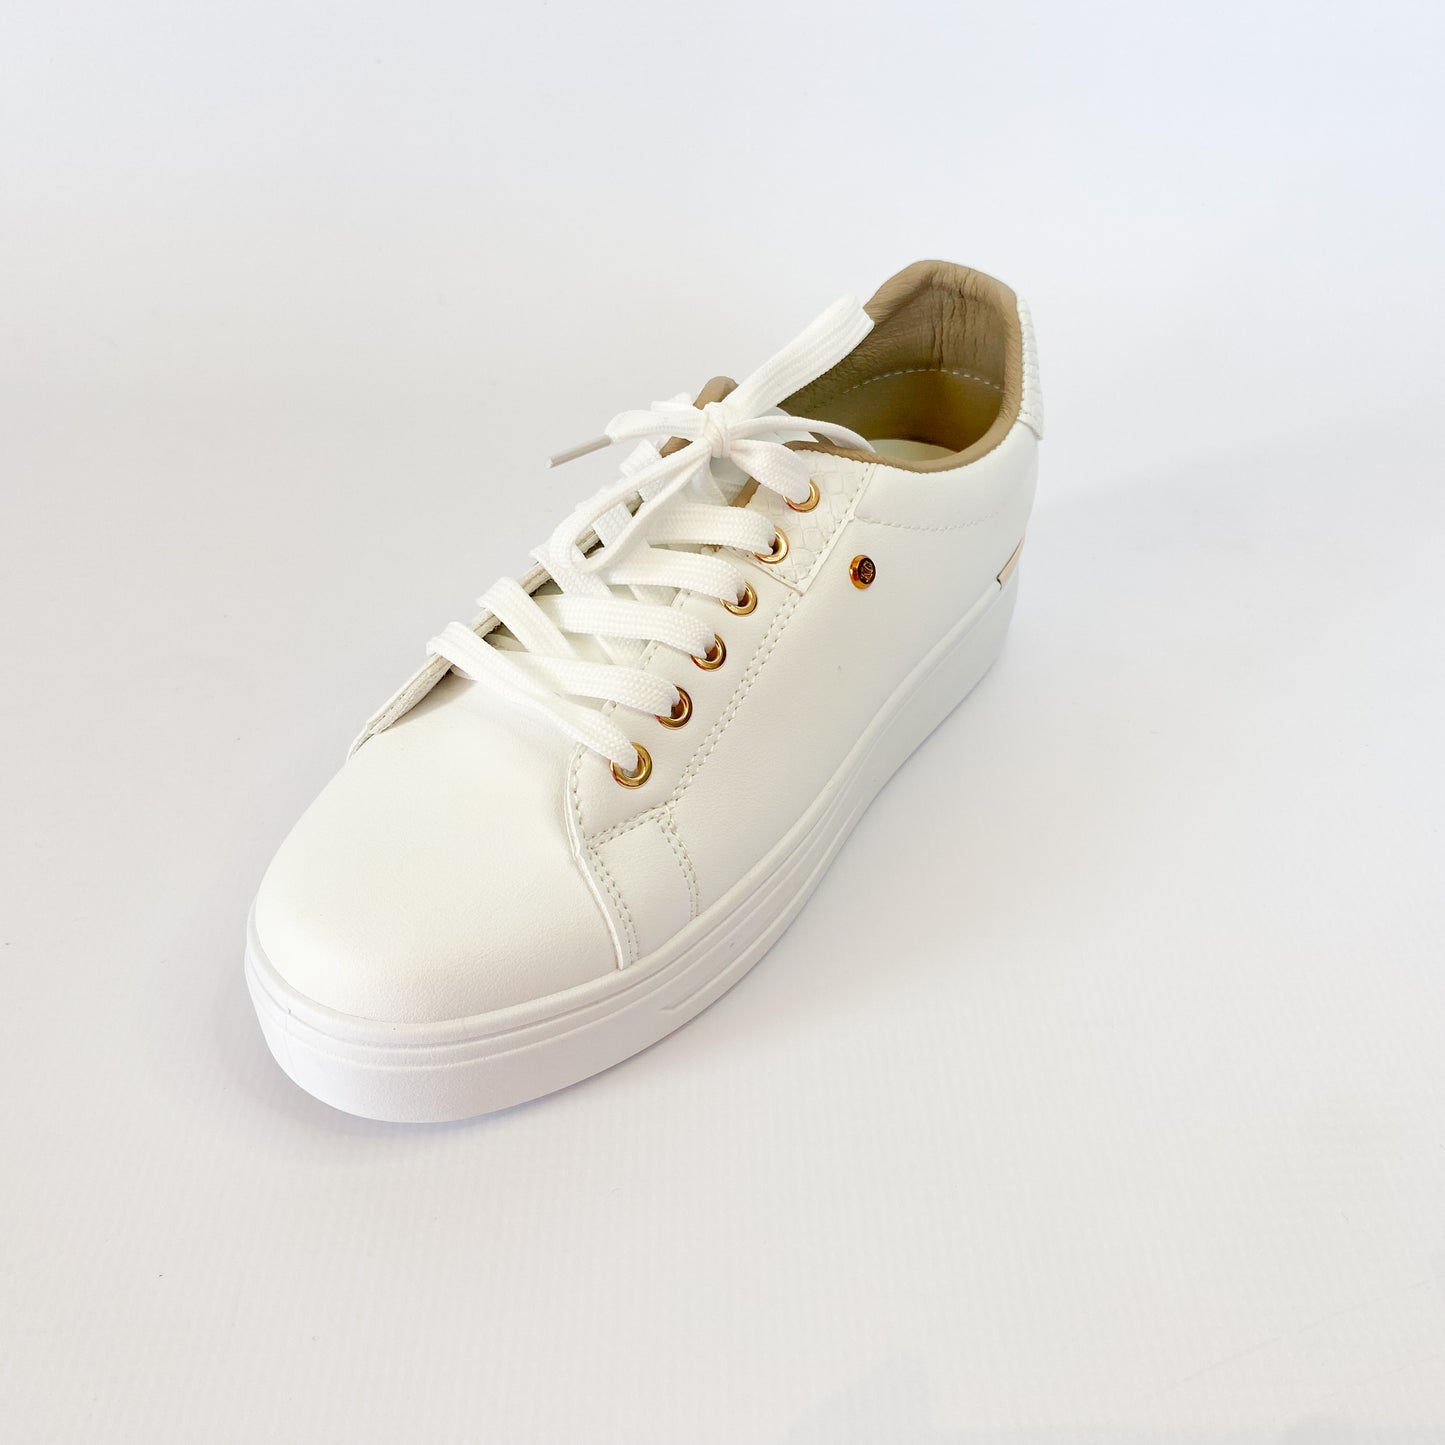 KG white with gold eyelet sneaker